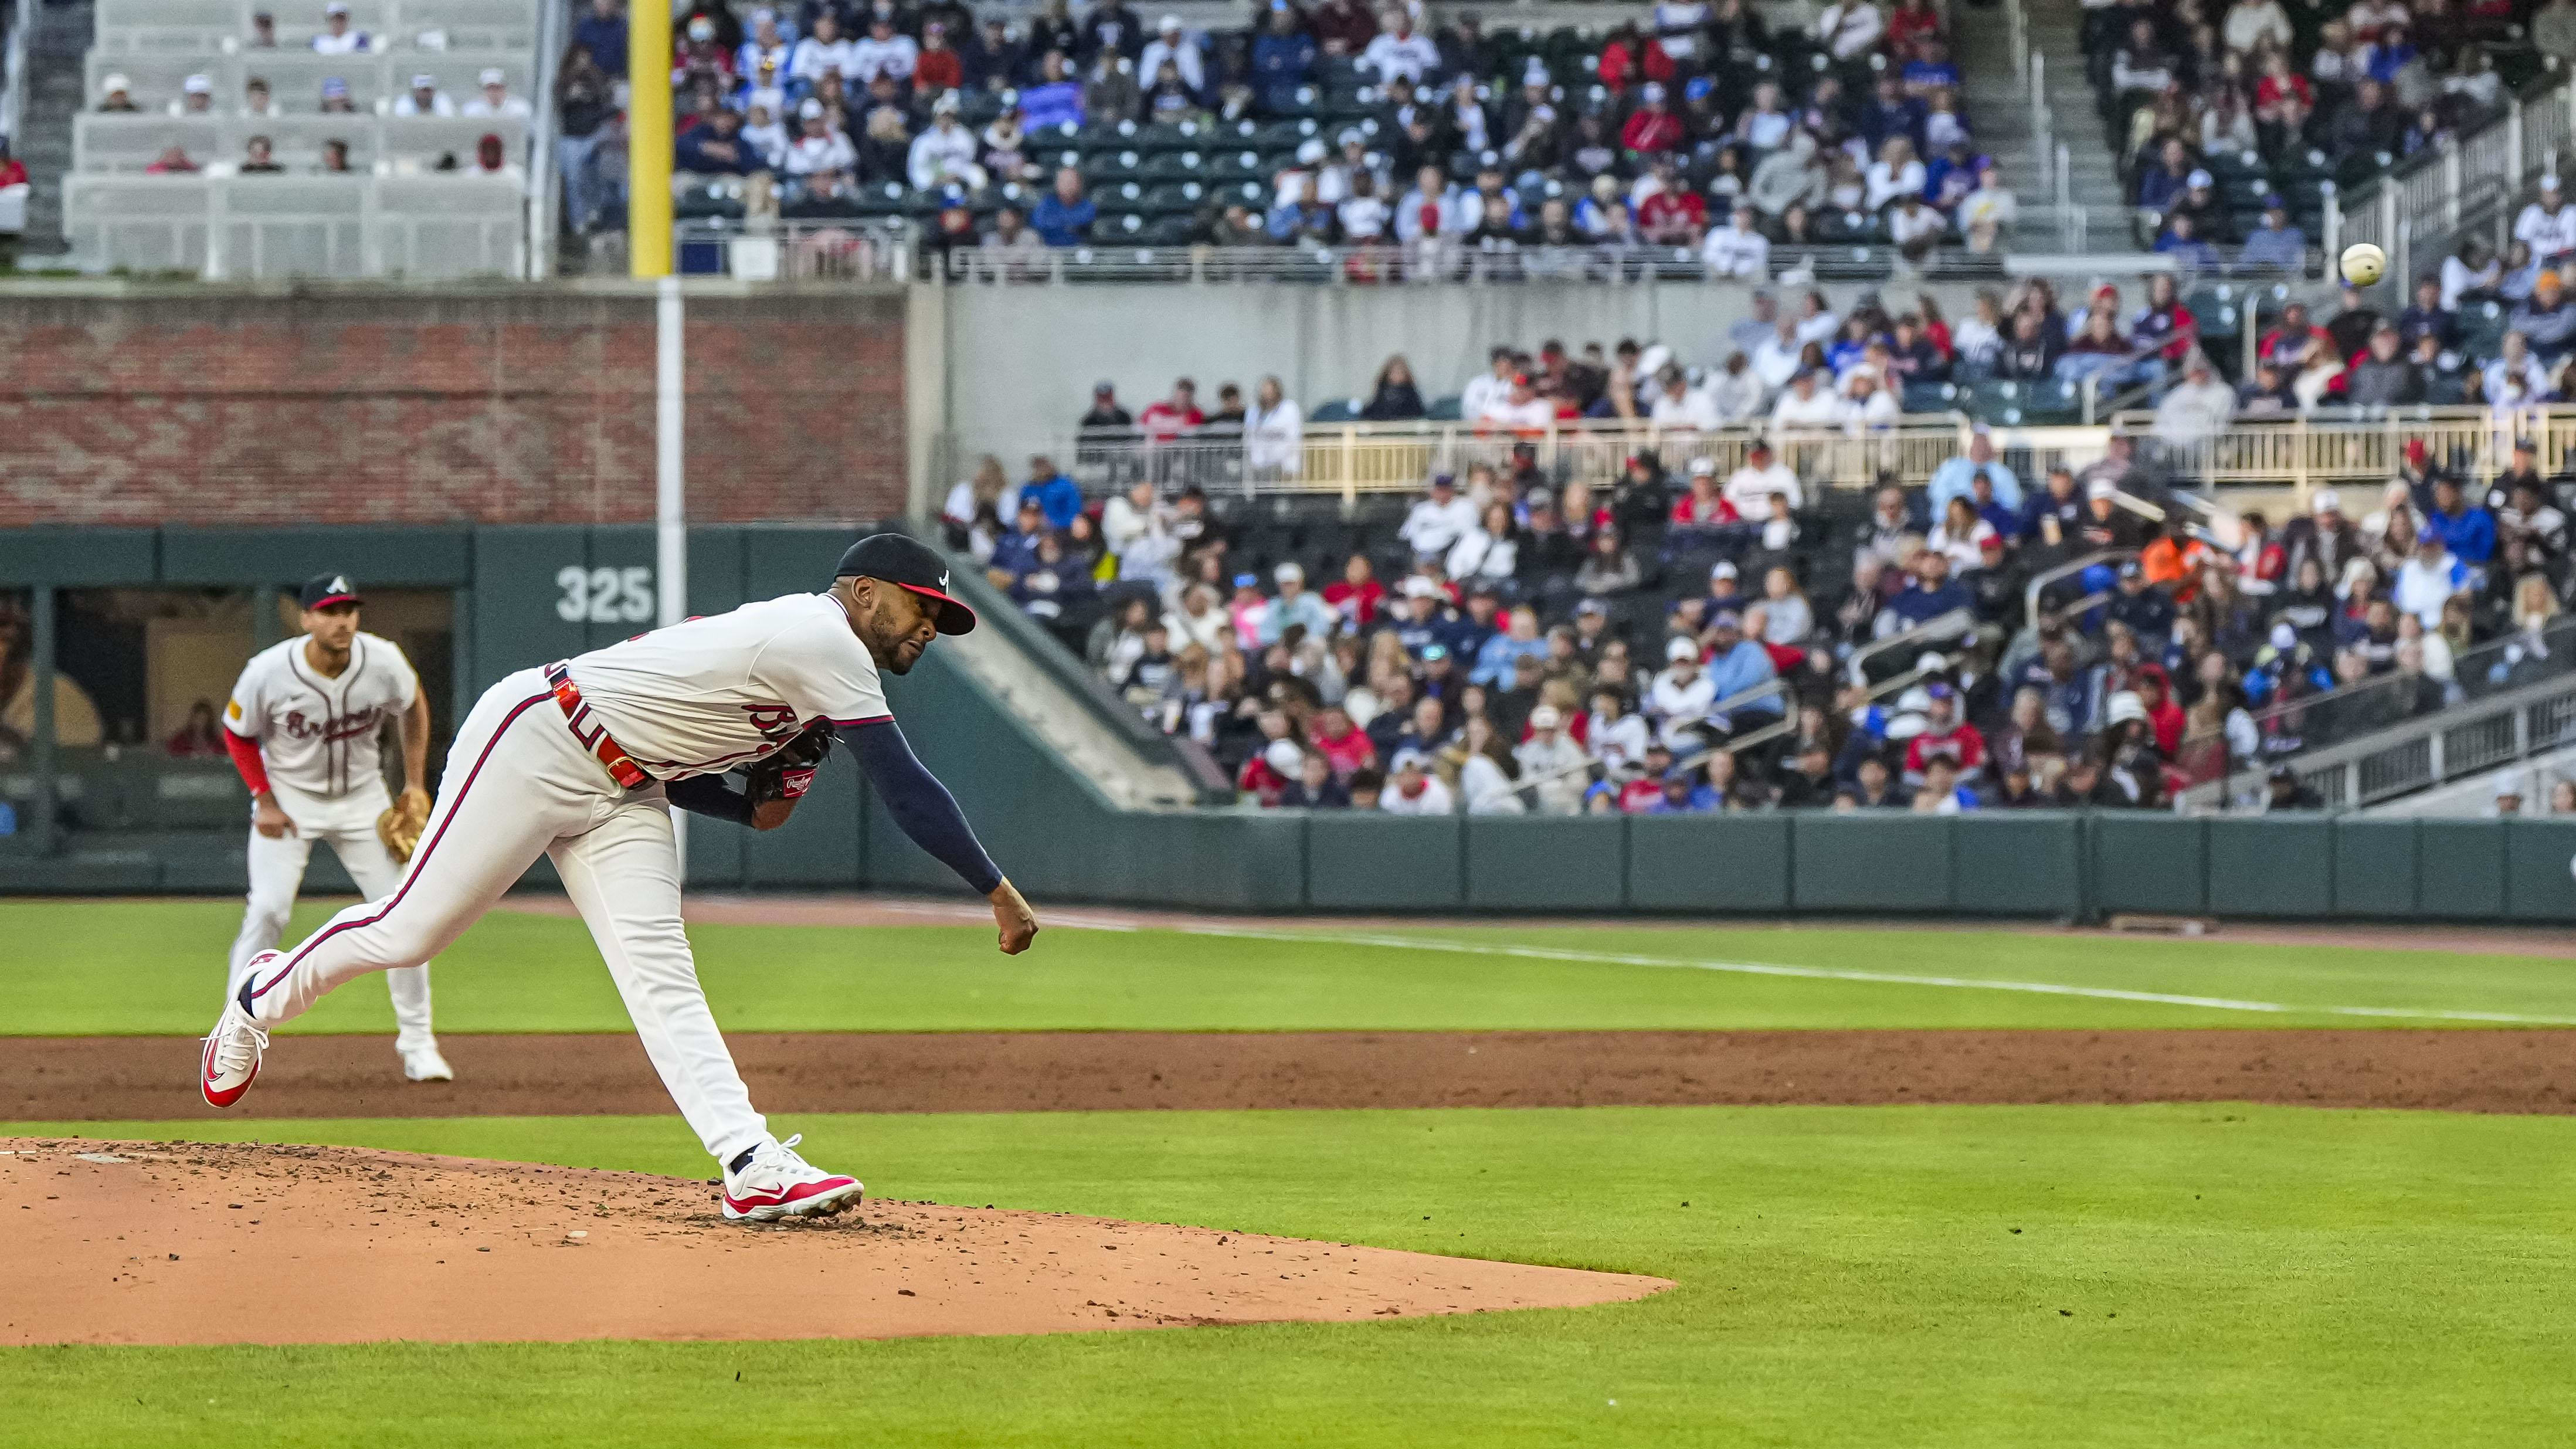 Atlanta Braves starting pitcher Darius Vines gave up four runs in his five innings tonight, taking the loss against the Texas Rangers